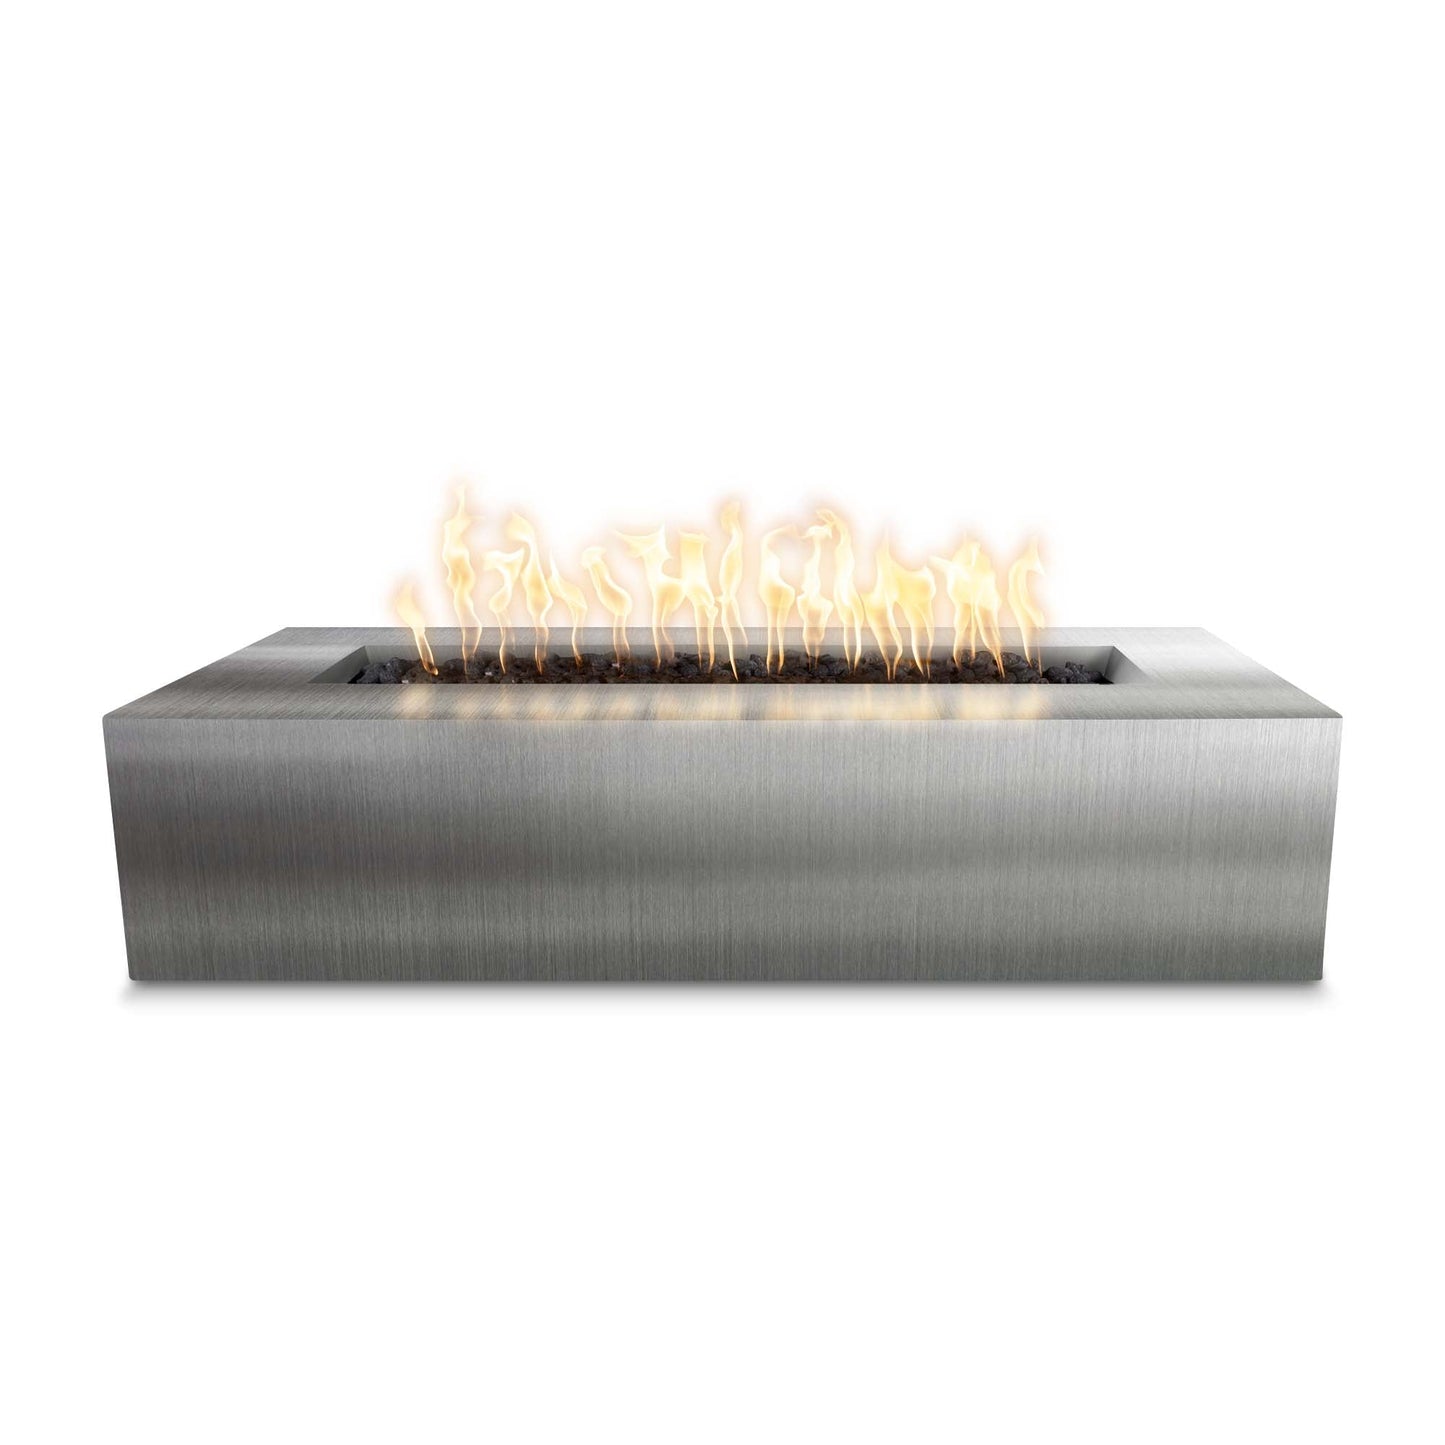 The Outdoor Plus Rectangular Regal 54" Hammered Copper Liquid Propane Fire Pit with 110V Electronic Ignition